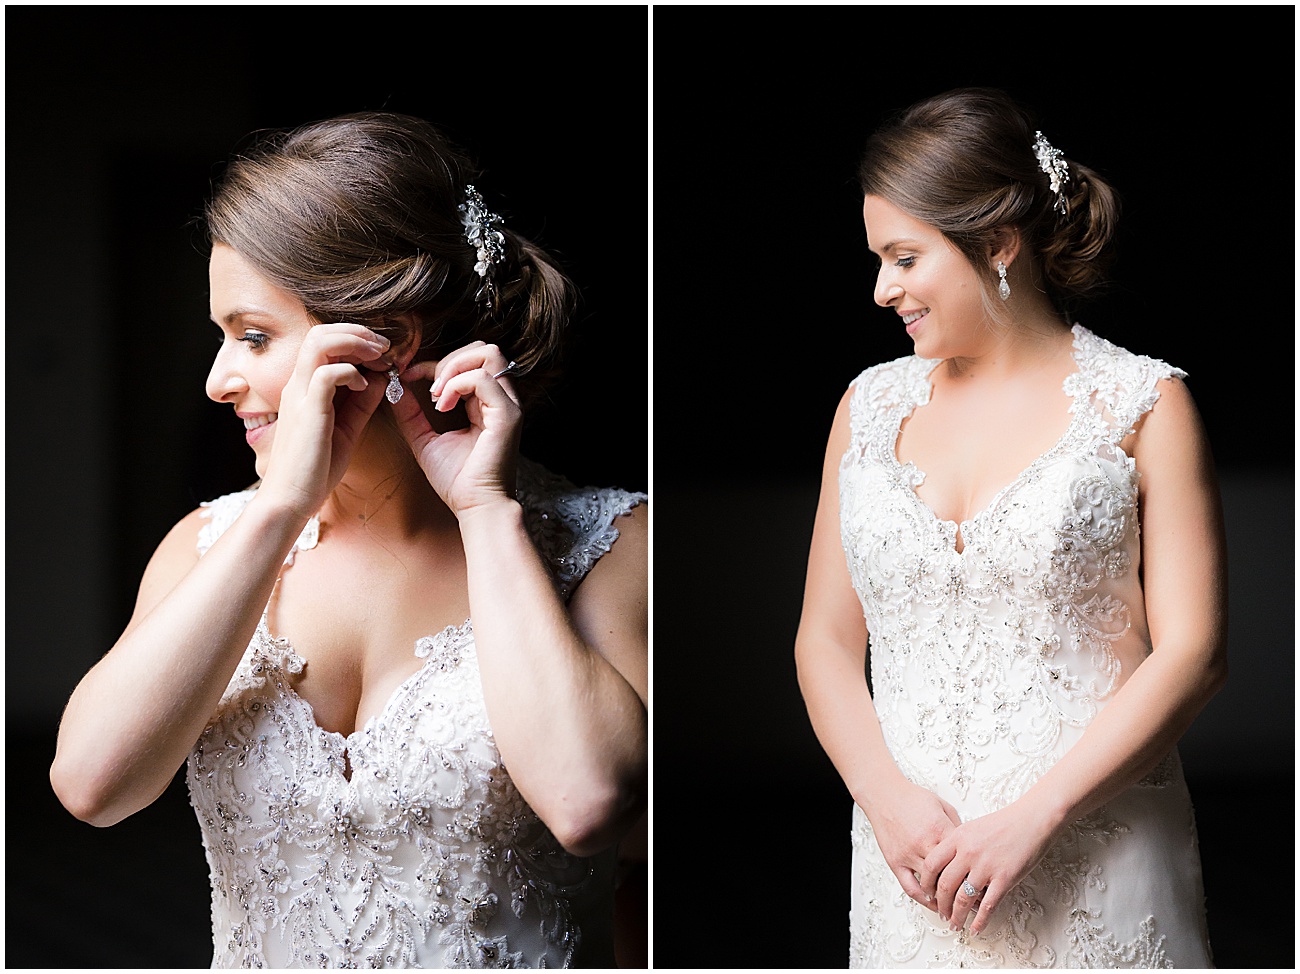 Bride Getting Ready at Eolia Mansion Wedding in Waterford CT by Jamerlyn Brown Photography